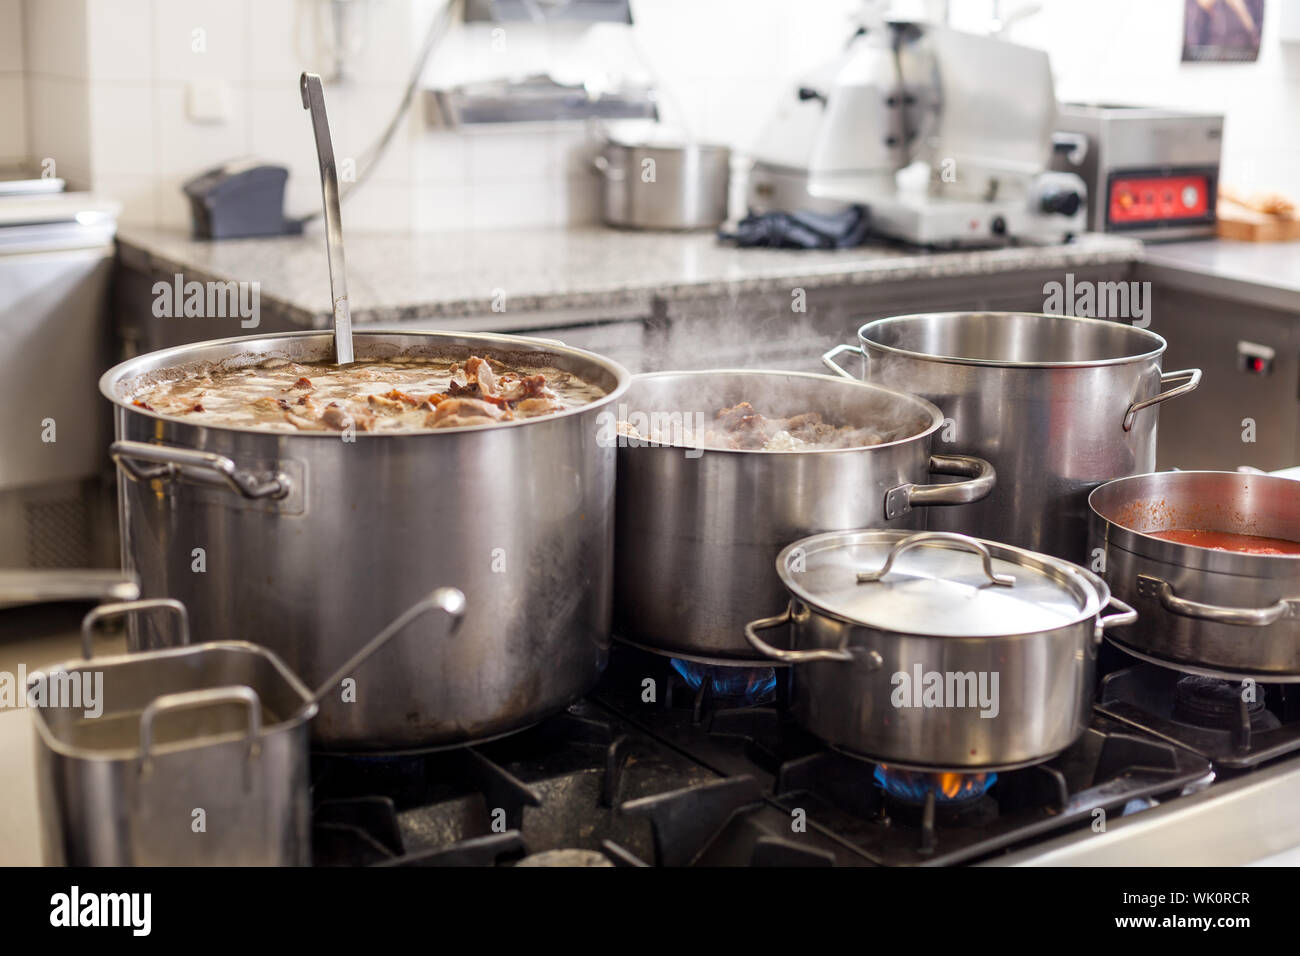 https://c8.alamy.com/comp/WK0RCR/cooking-in-a-commercial-kitchen-with-large-stainless-steel-pots-filled-with-stew-and-vegetables-on-a-central-gas-hob-WK0RCR.jpg